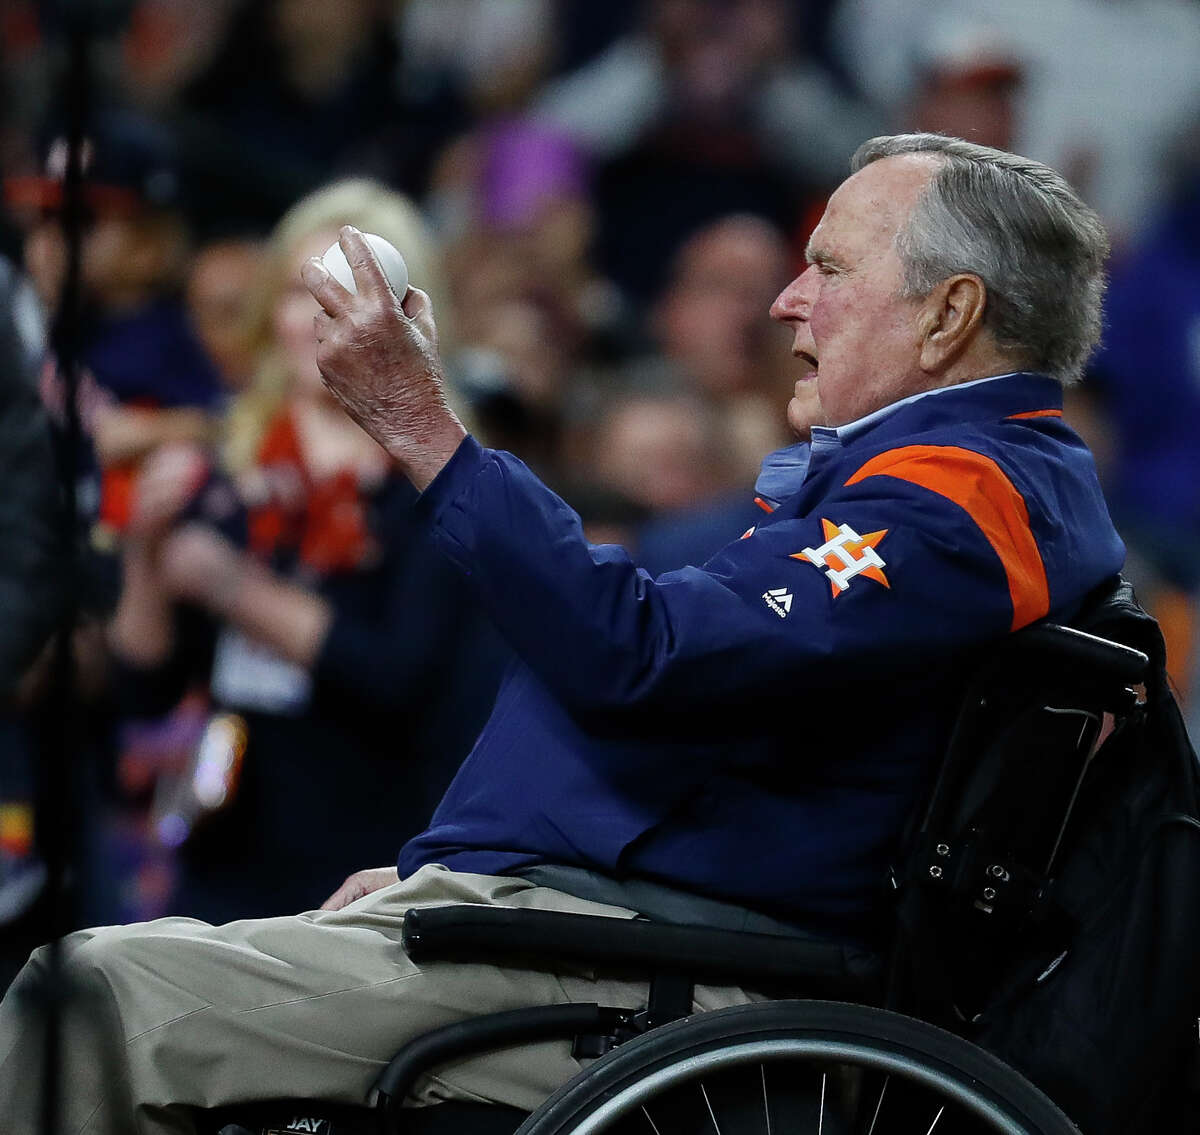 George Bush Presidential Library & Museum hosts Astros Championship Trophy  Tour